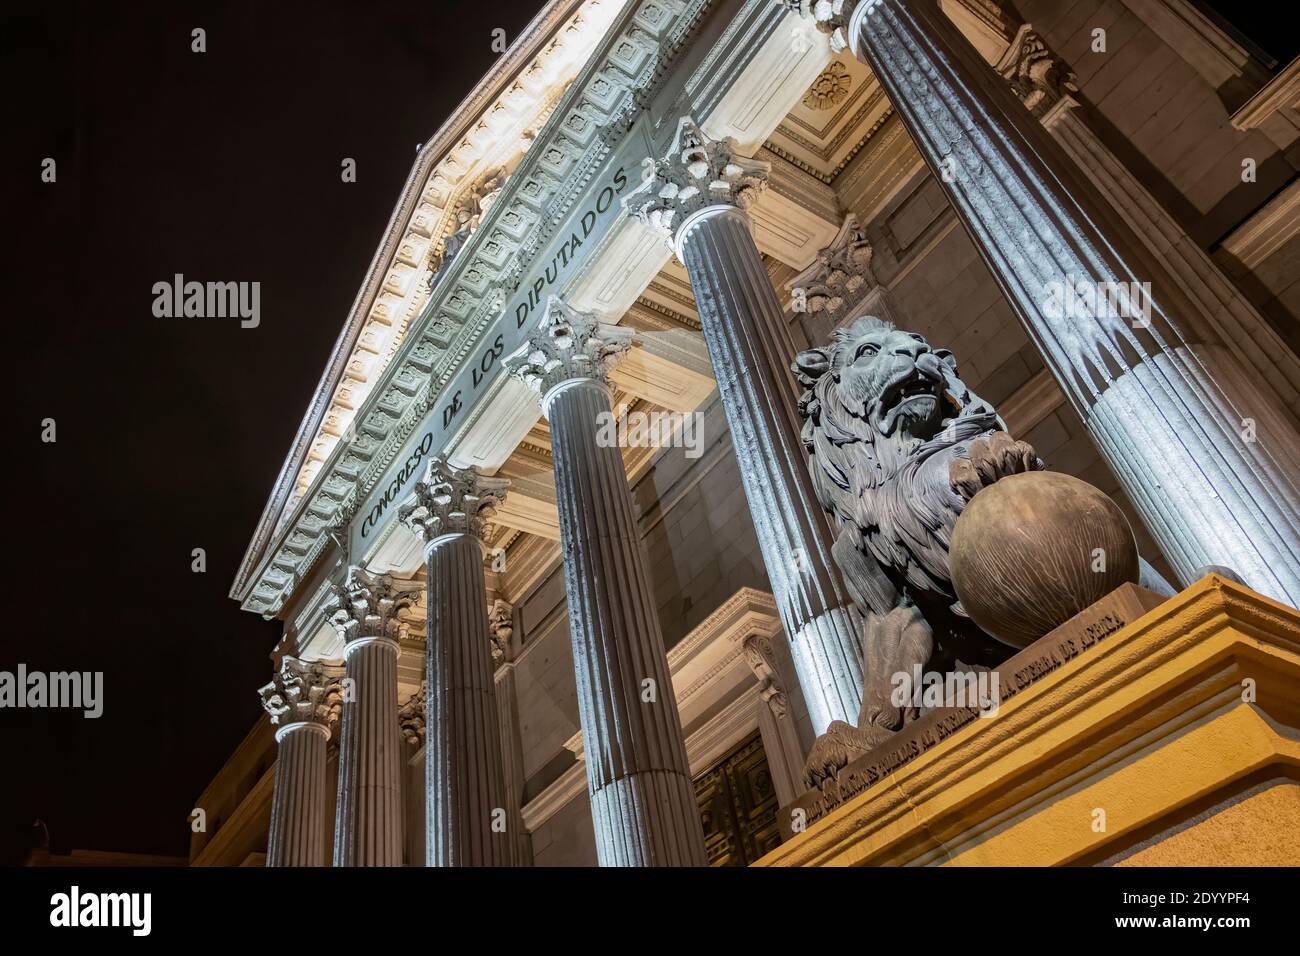 night view of the main facade of the Palacio de la Cortes, palace of courts, seat of the Congress of Deputies in Madrid, Spain, with one of its iconic Stock Photo